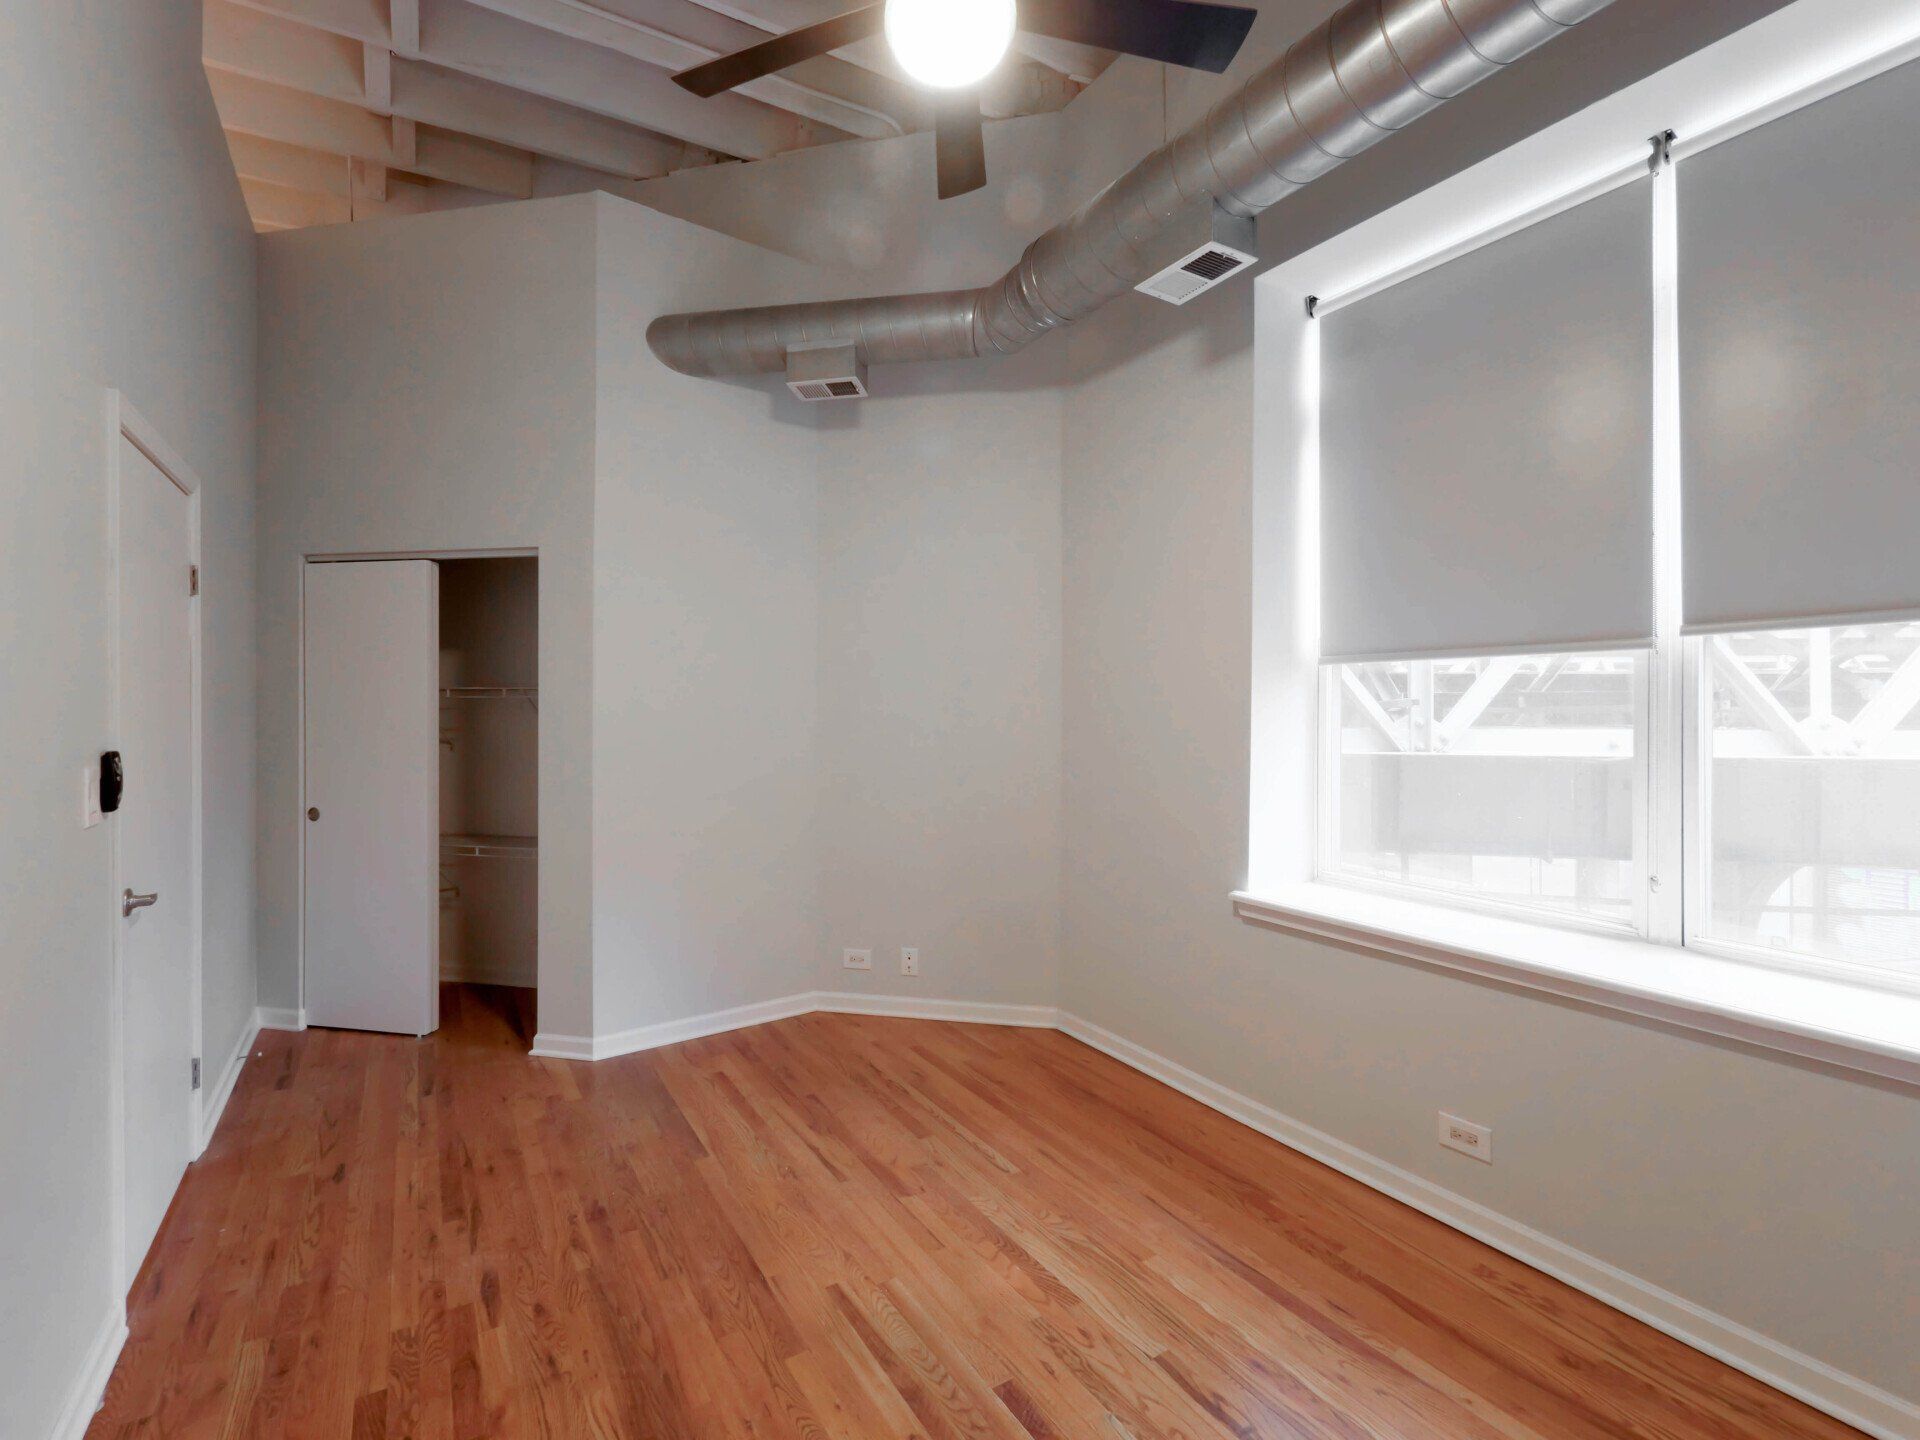 An empty room with hardwood floors and a ceiling fan at 1550 North Damen.